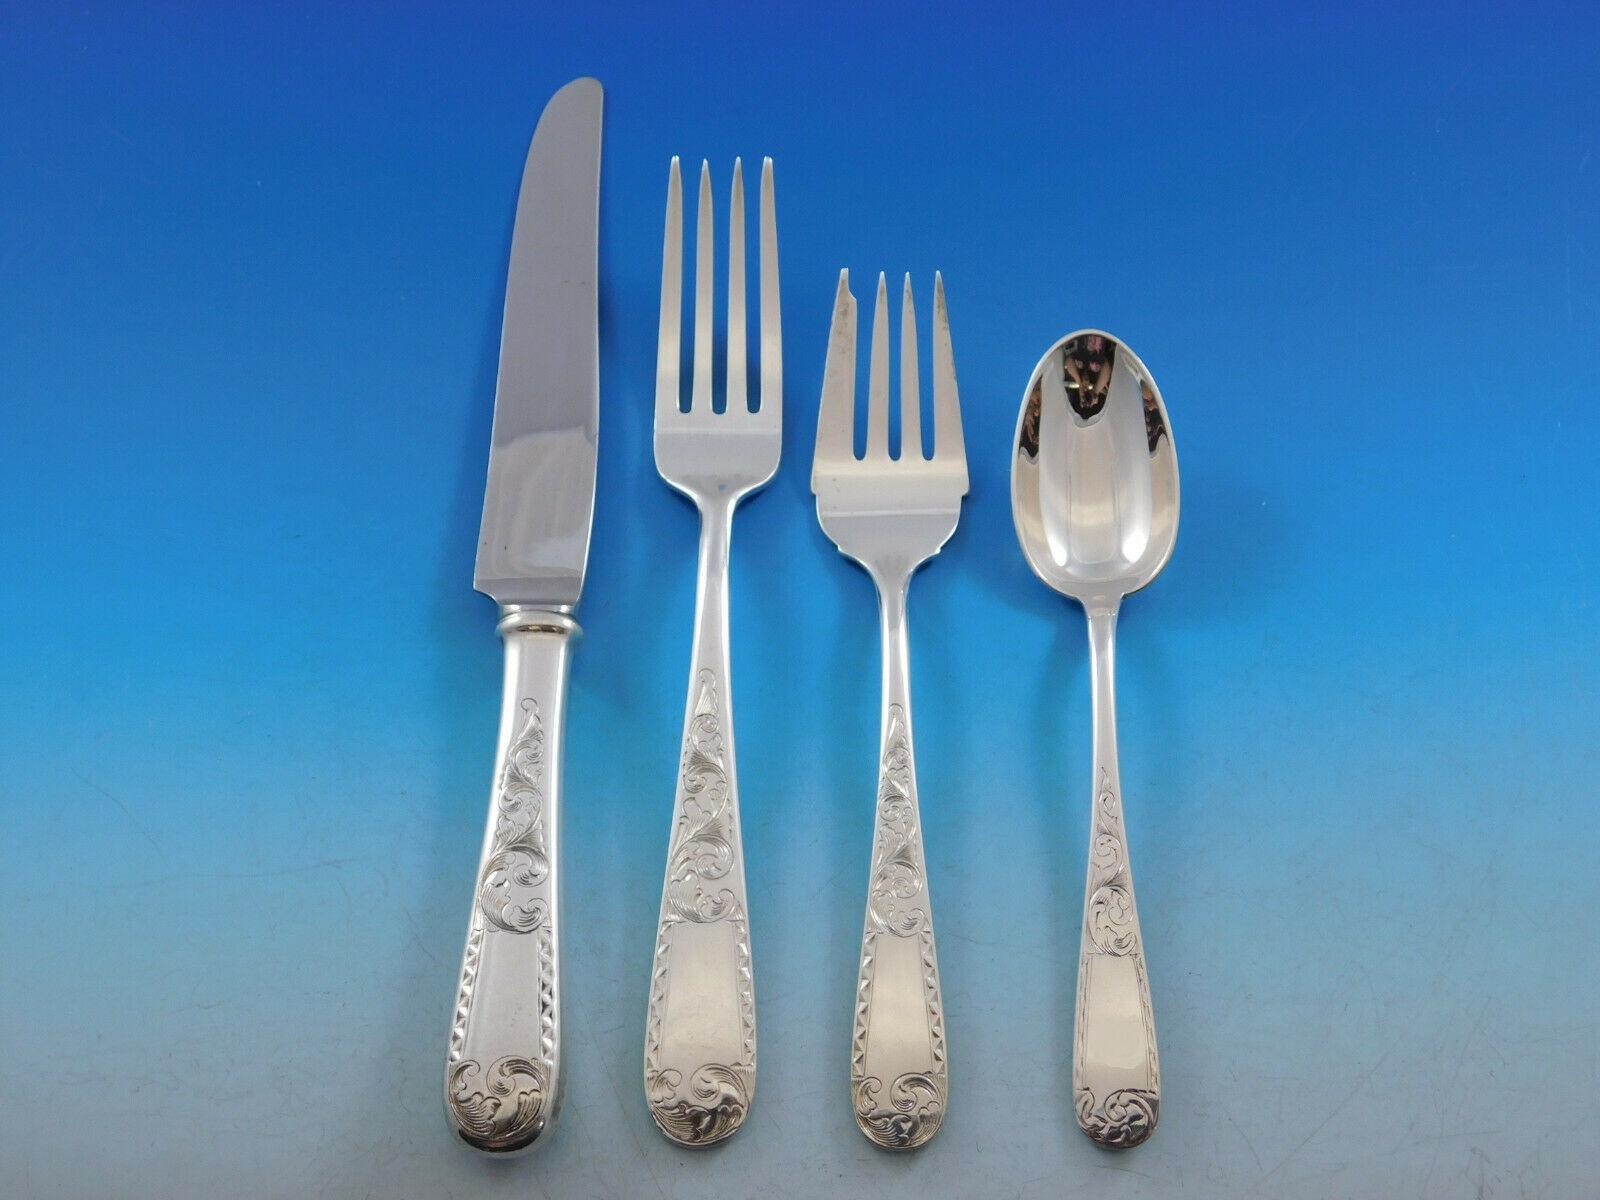 Scarce Mayflower by Kirk Stieff Sterling Silver Flatware set - 54 pieces. This set includes:

8 knives, 8 3/4